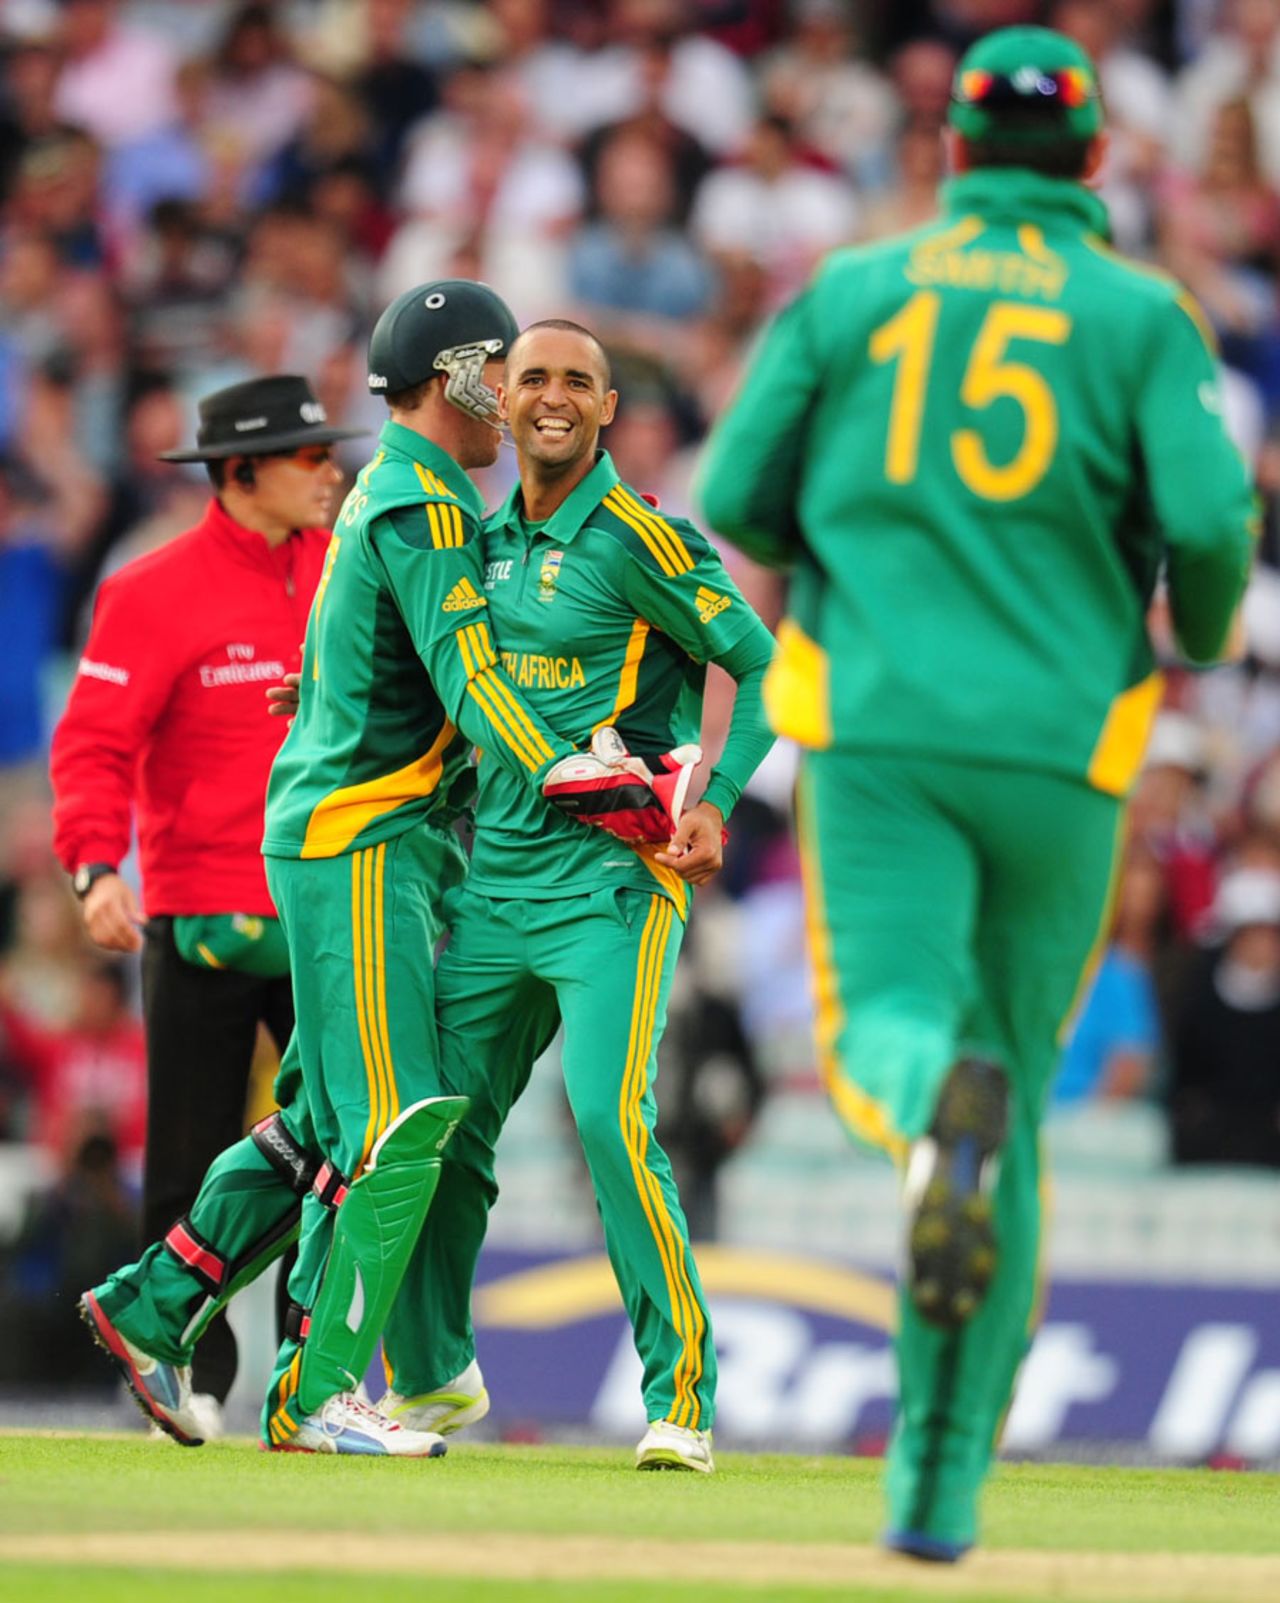 Robin Peterson is congratulated on dismissing England's captain, England v South Africa, 3rd NatWest ODI, The Oval, August 31, 2012